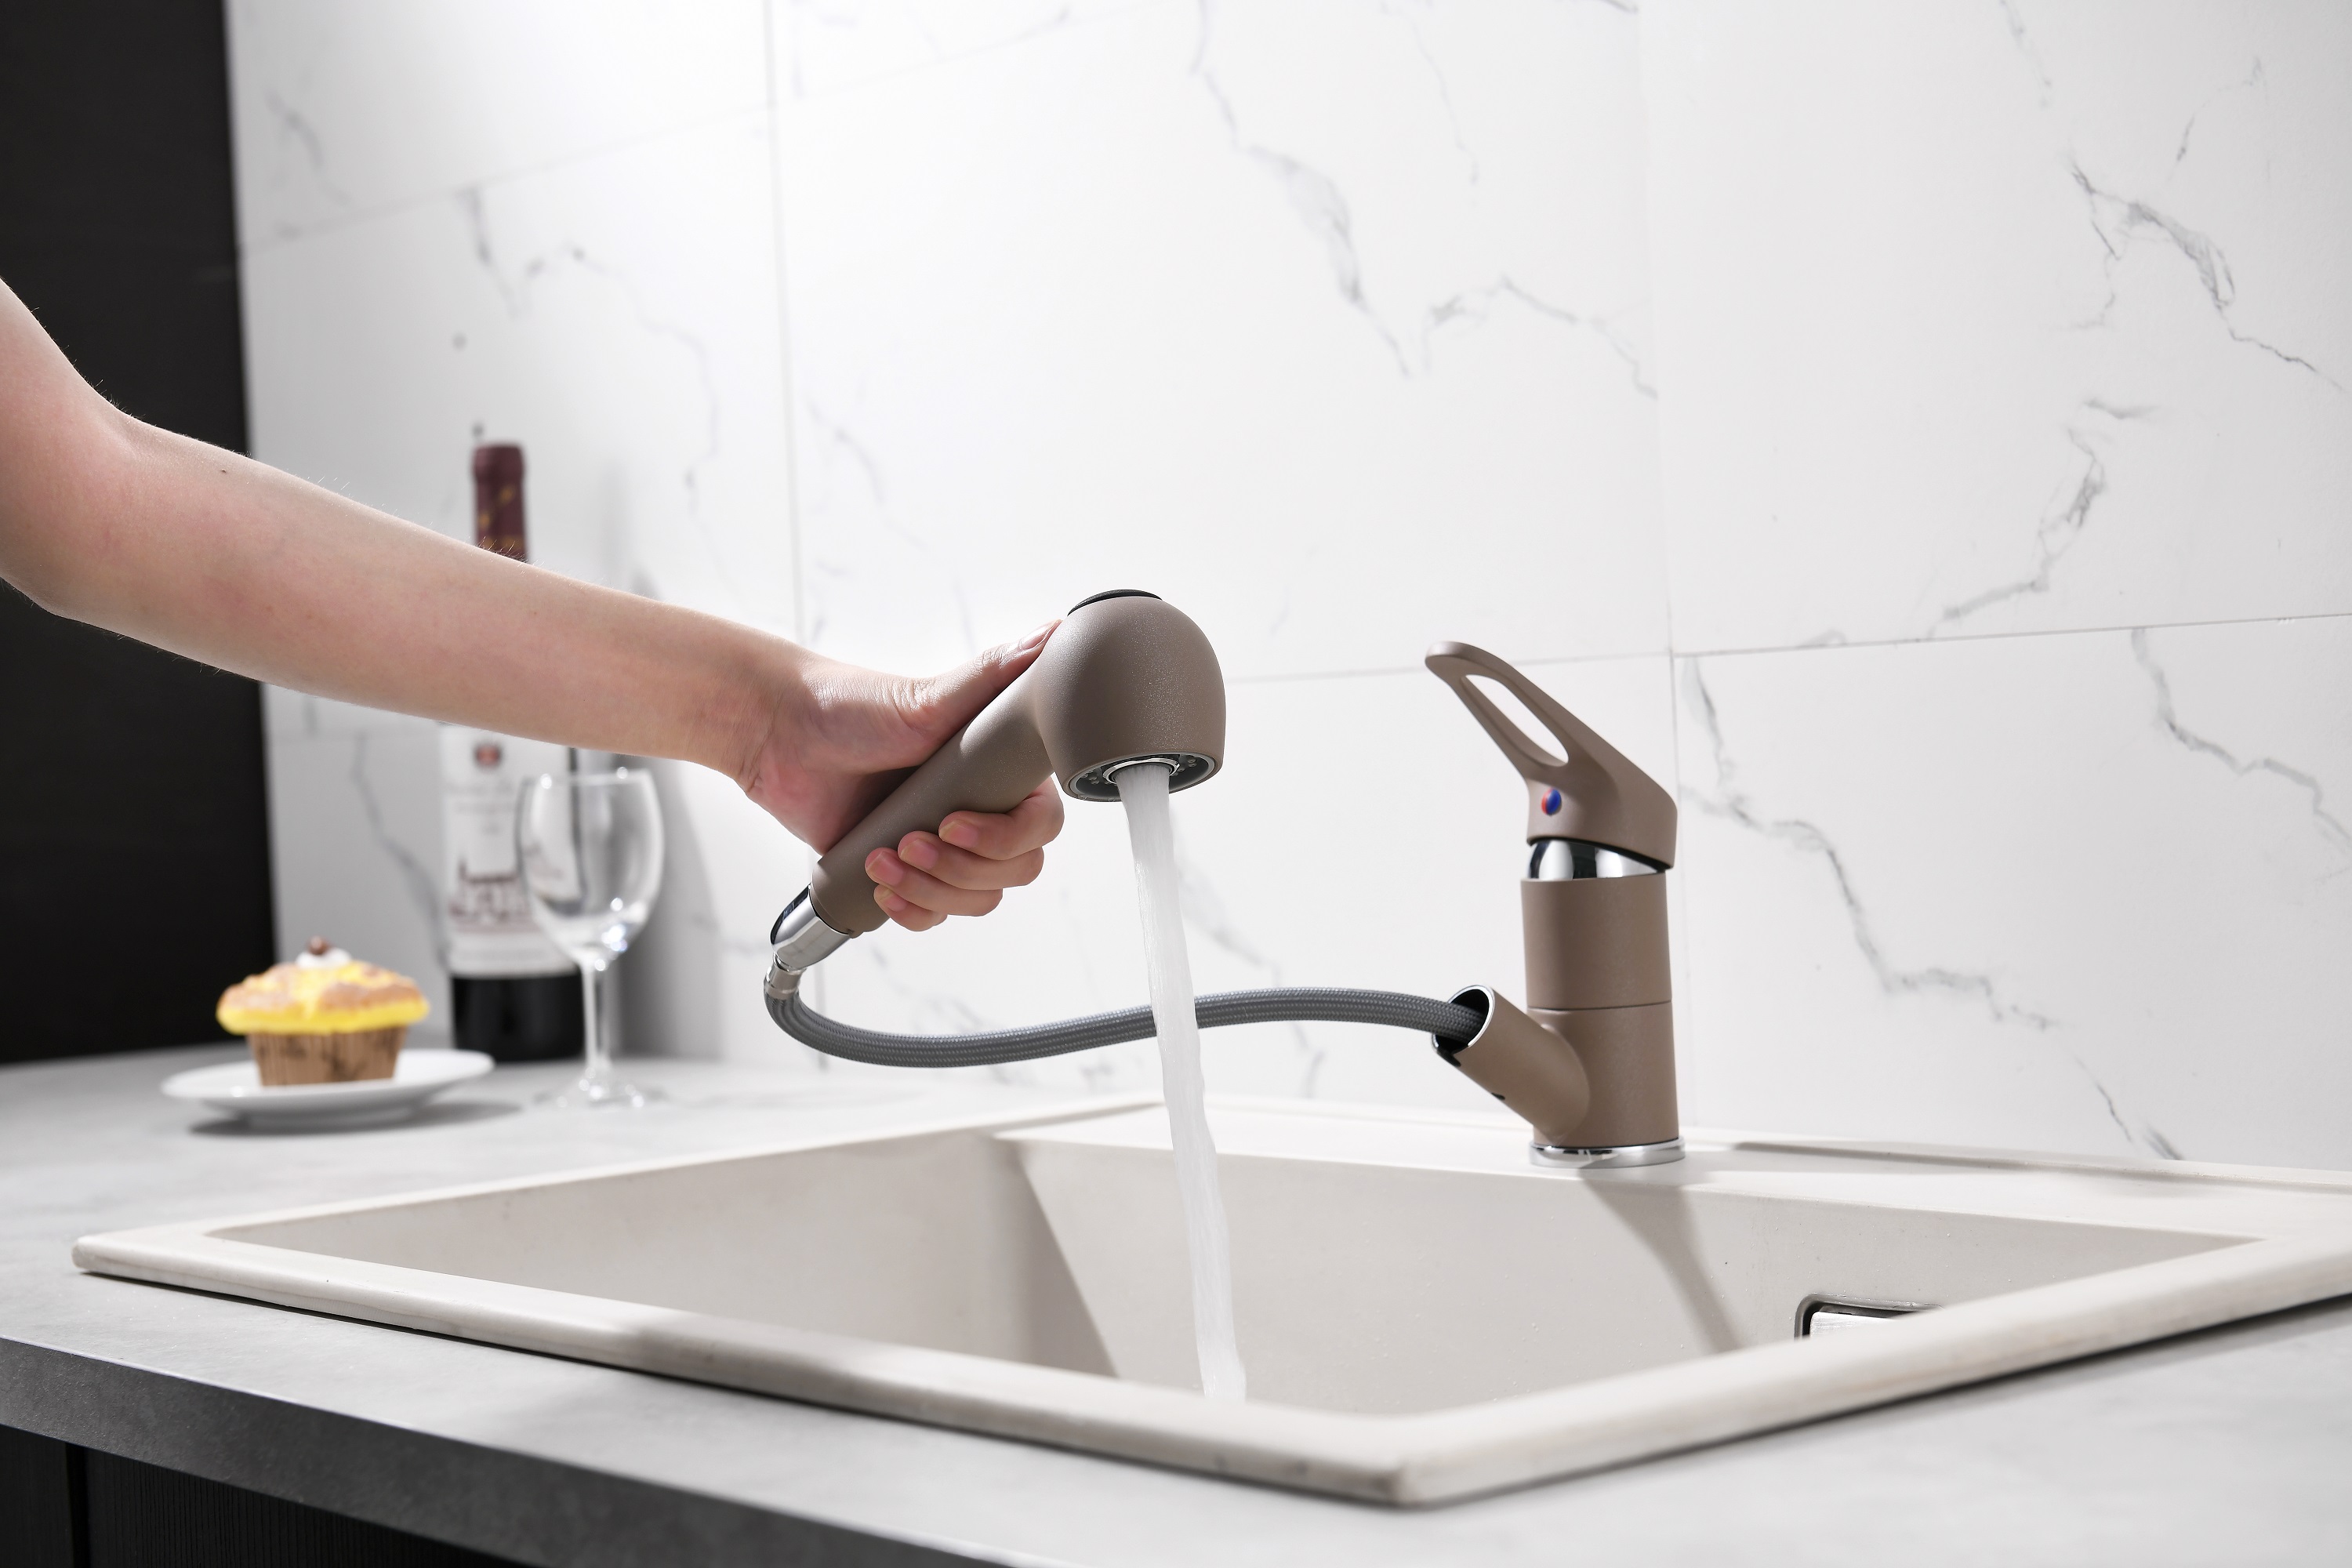 APS308-CB Coffee Brown Kitchen Faucet Industrial Kitchen Faucet Pull-Out Spout Faucet Kitchen Vintage